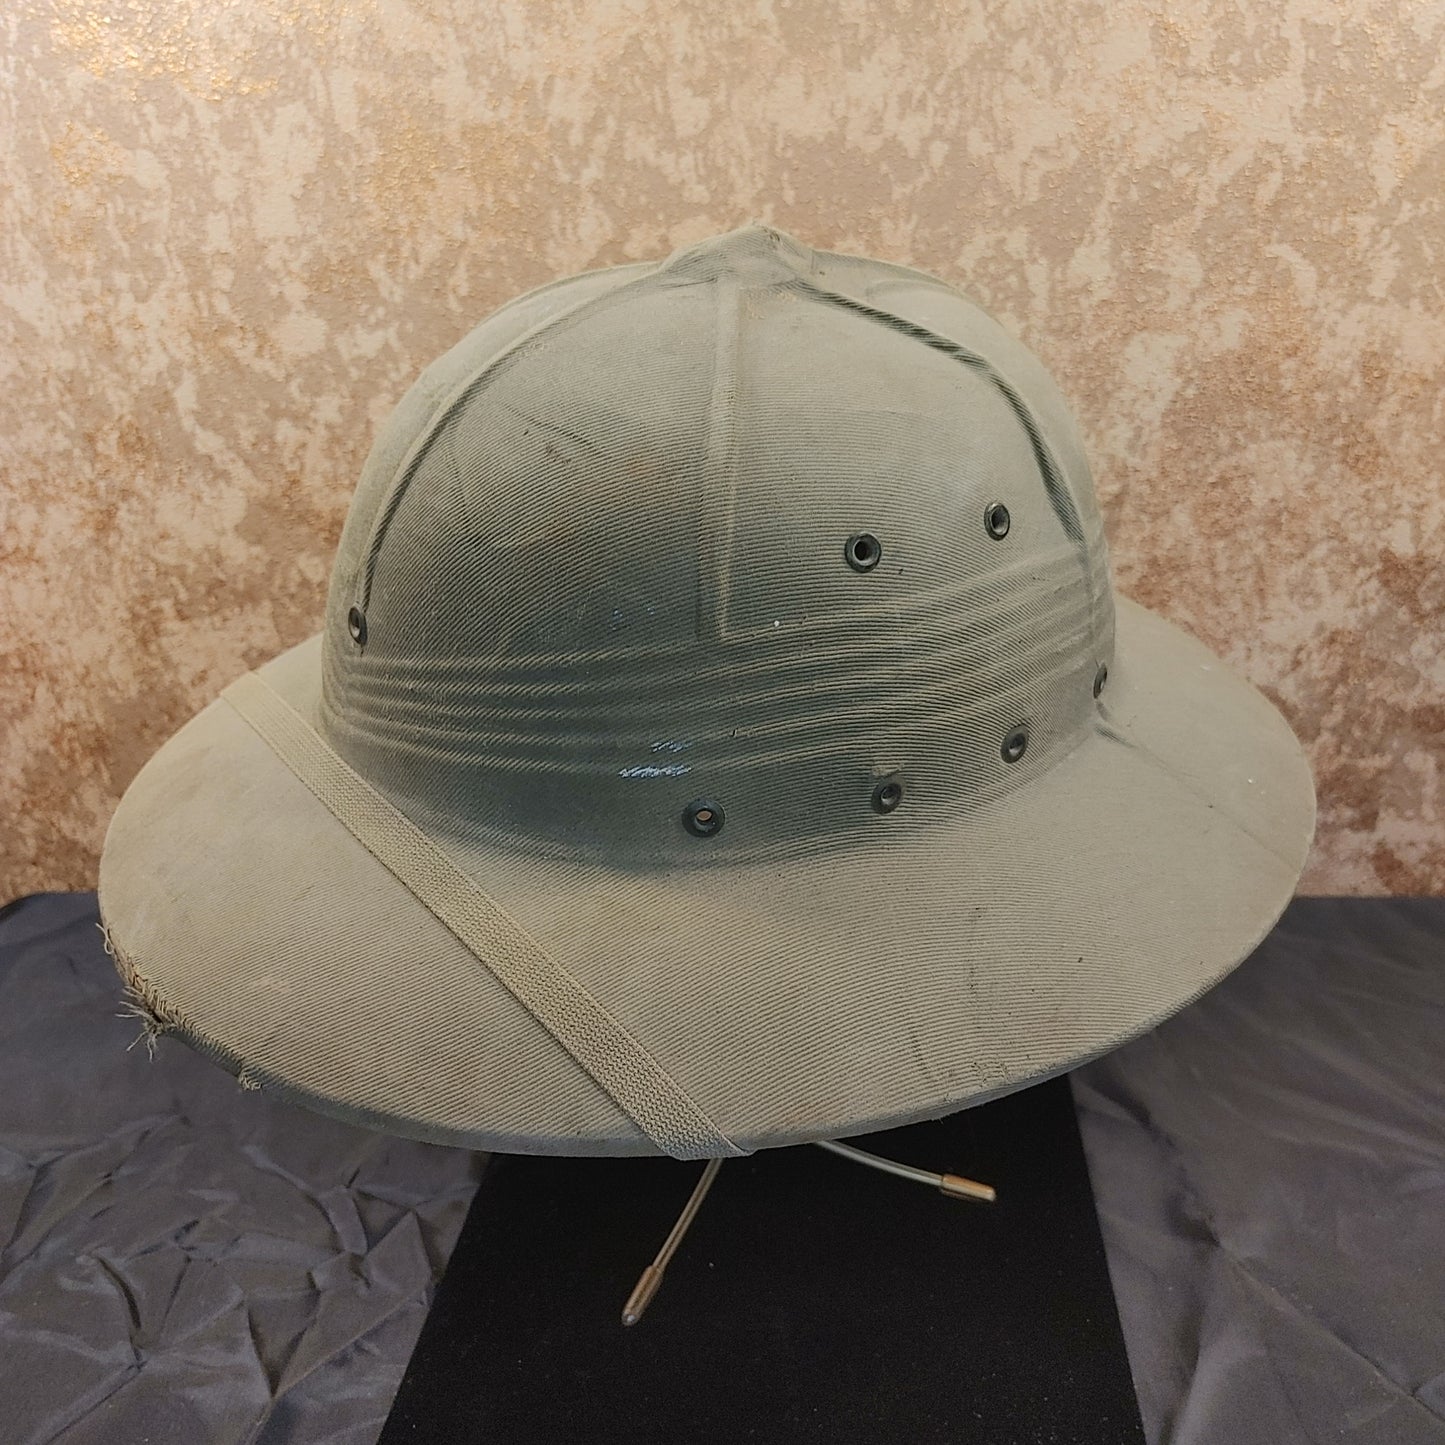 What a Pithy! Vintage Pith Helmet 1940's? WWII Soldier Hat Sun Free Shipping!